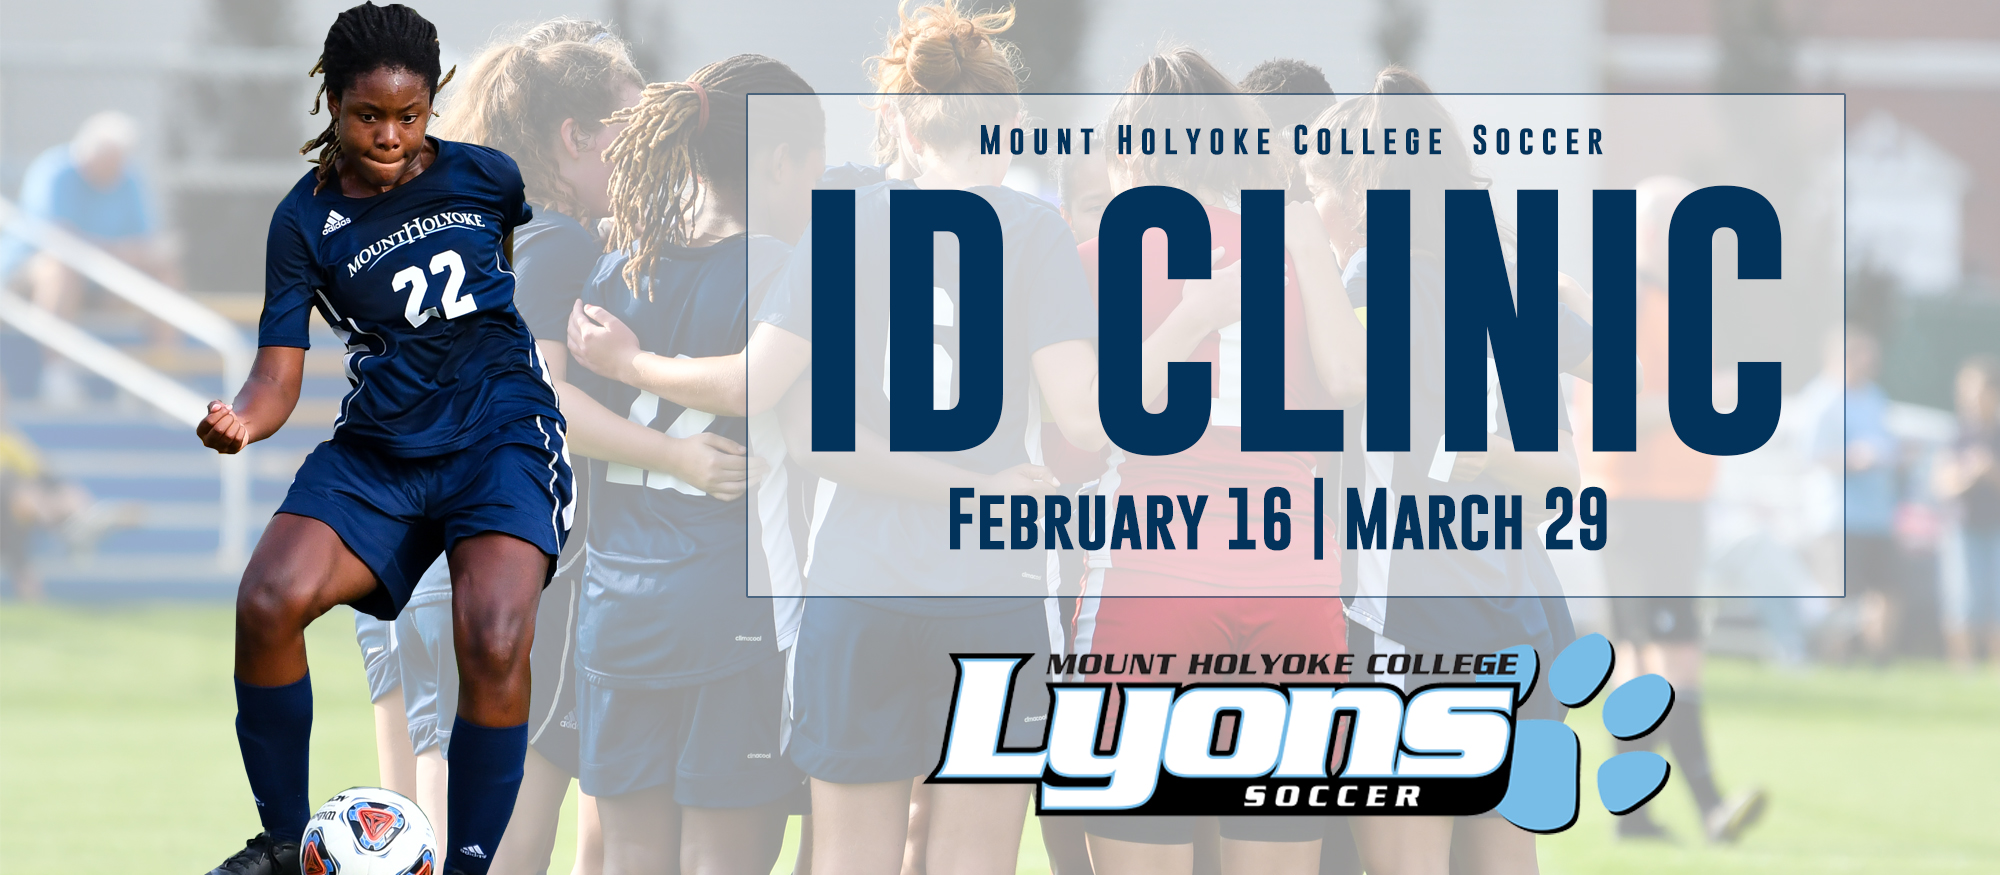 Soccer to Host Girls' ID Clinics on February 16 and March 29